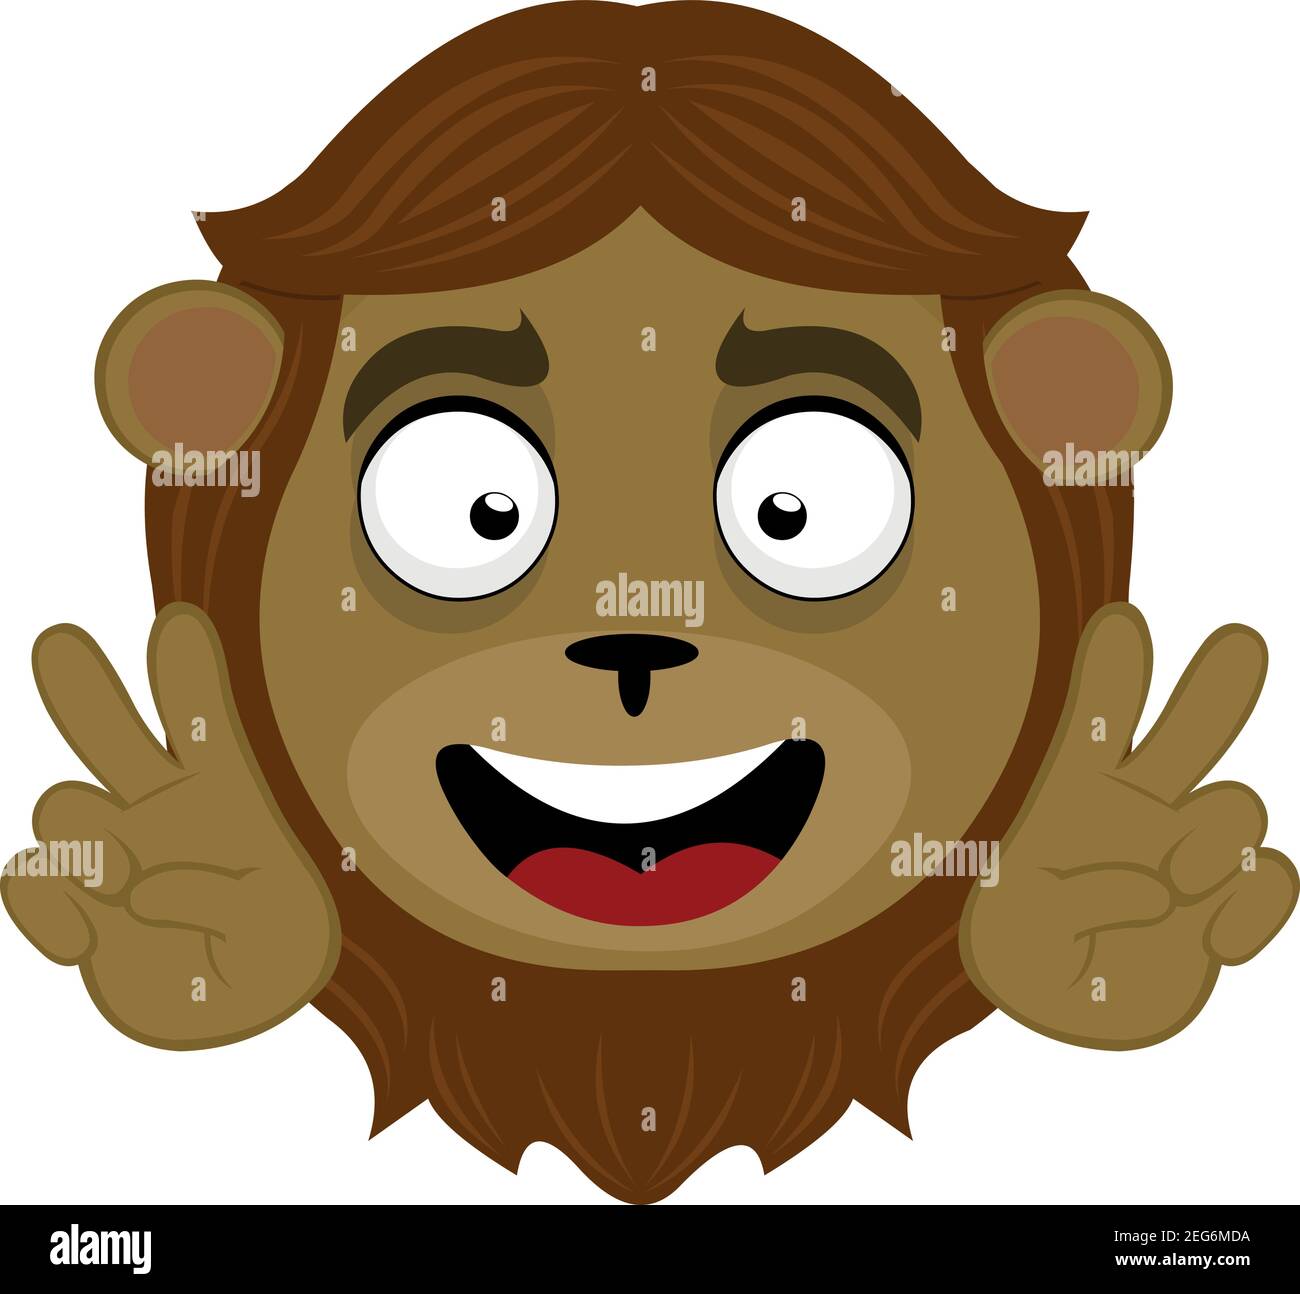 Vector emoticon  illustration cartoon of a lion's head with a happy expression and a gesture of his hands making a peace sign Stock Vector